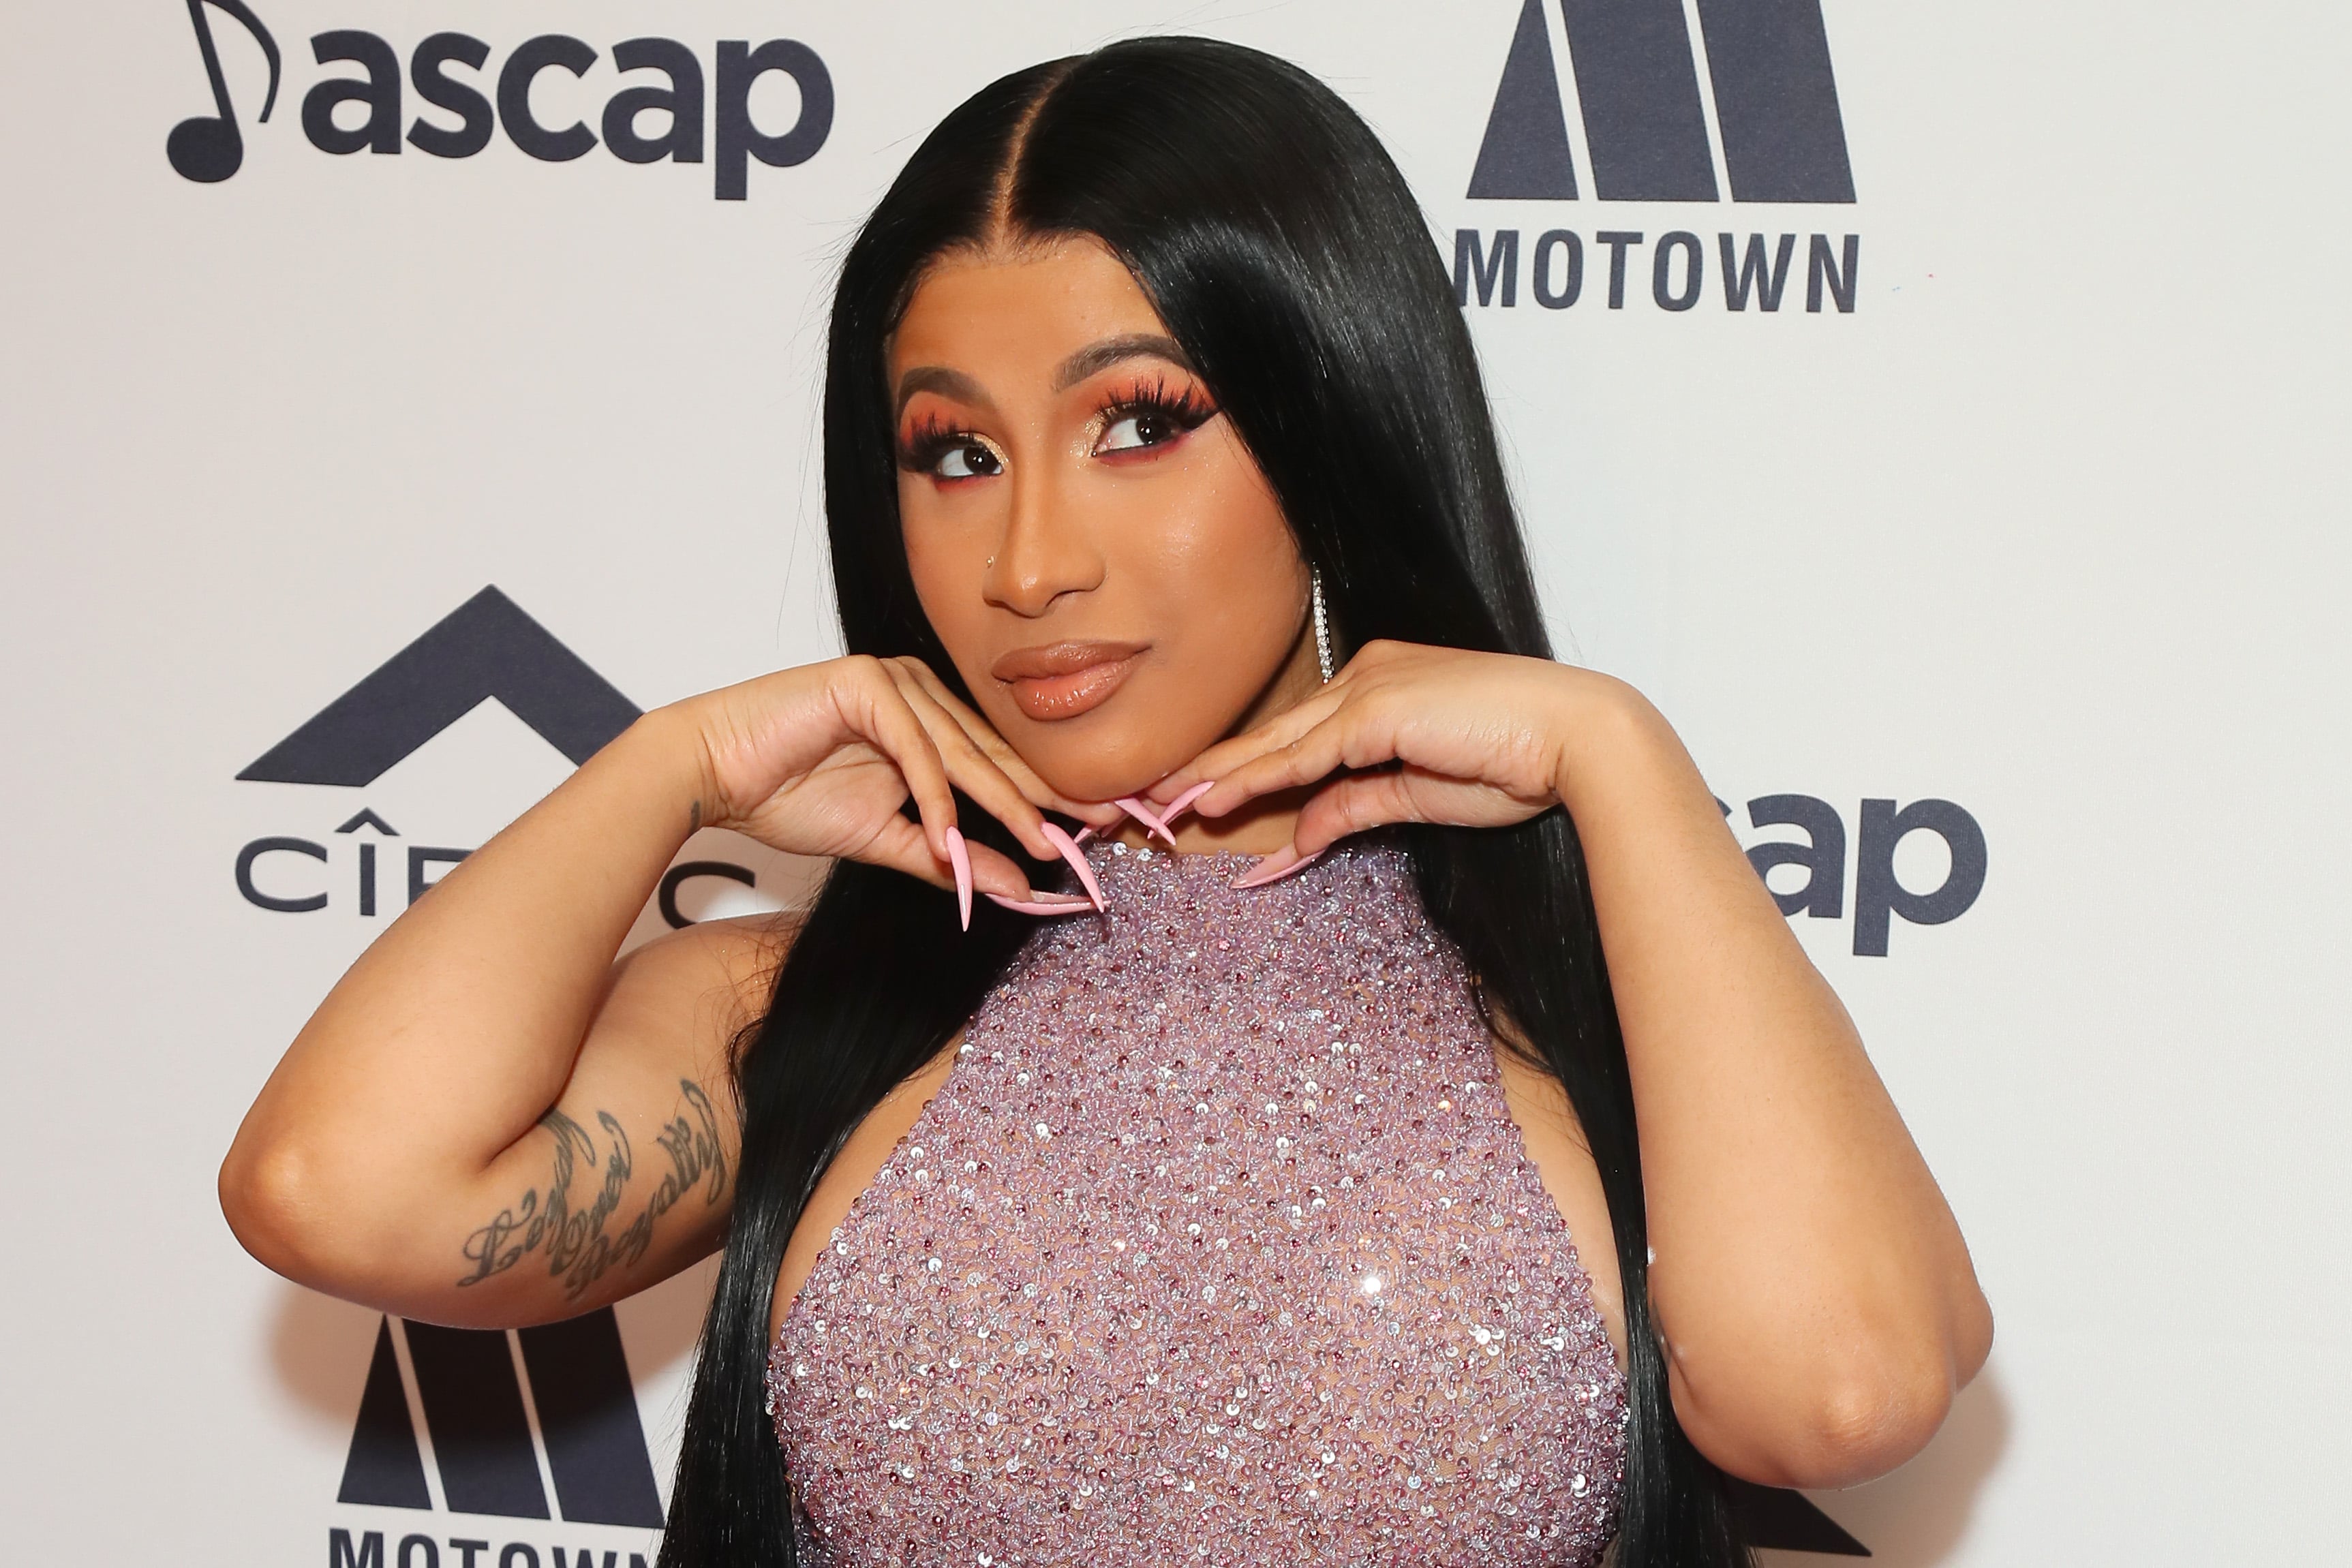 Opinion: Is It Possible that Cardi B is Collabing with Louis Vuitton?